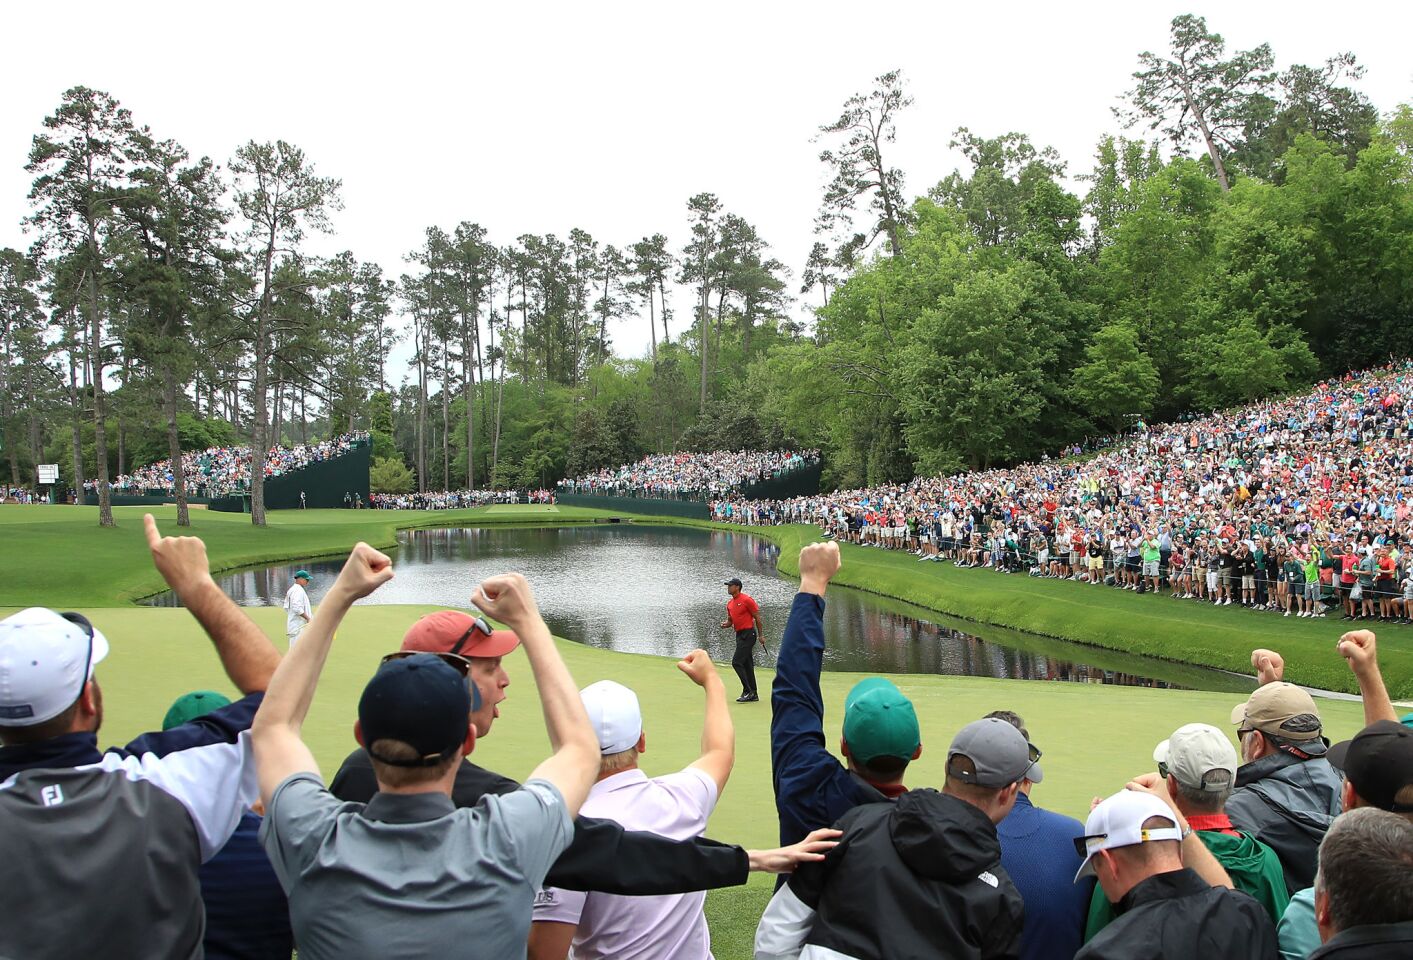 Patrons cheer as Tiger Woods celebrates his birdie on the 16th green during the final round of the Masters on Sunday at Augusta National Golf Club in Augusta, Ga.